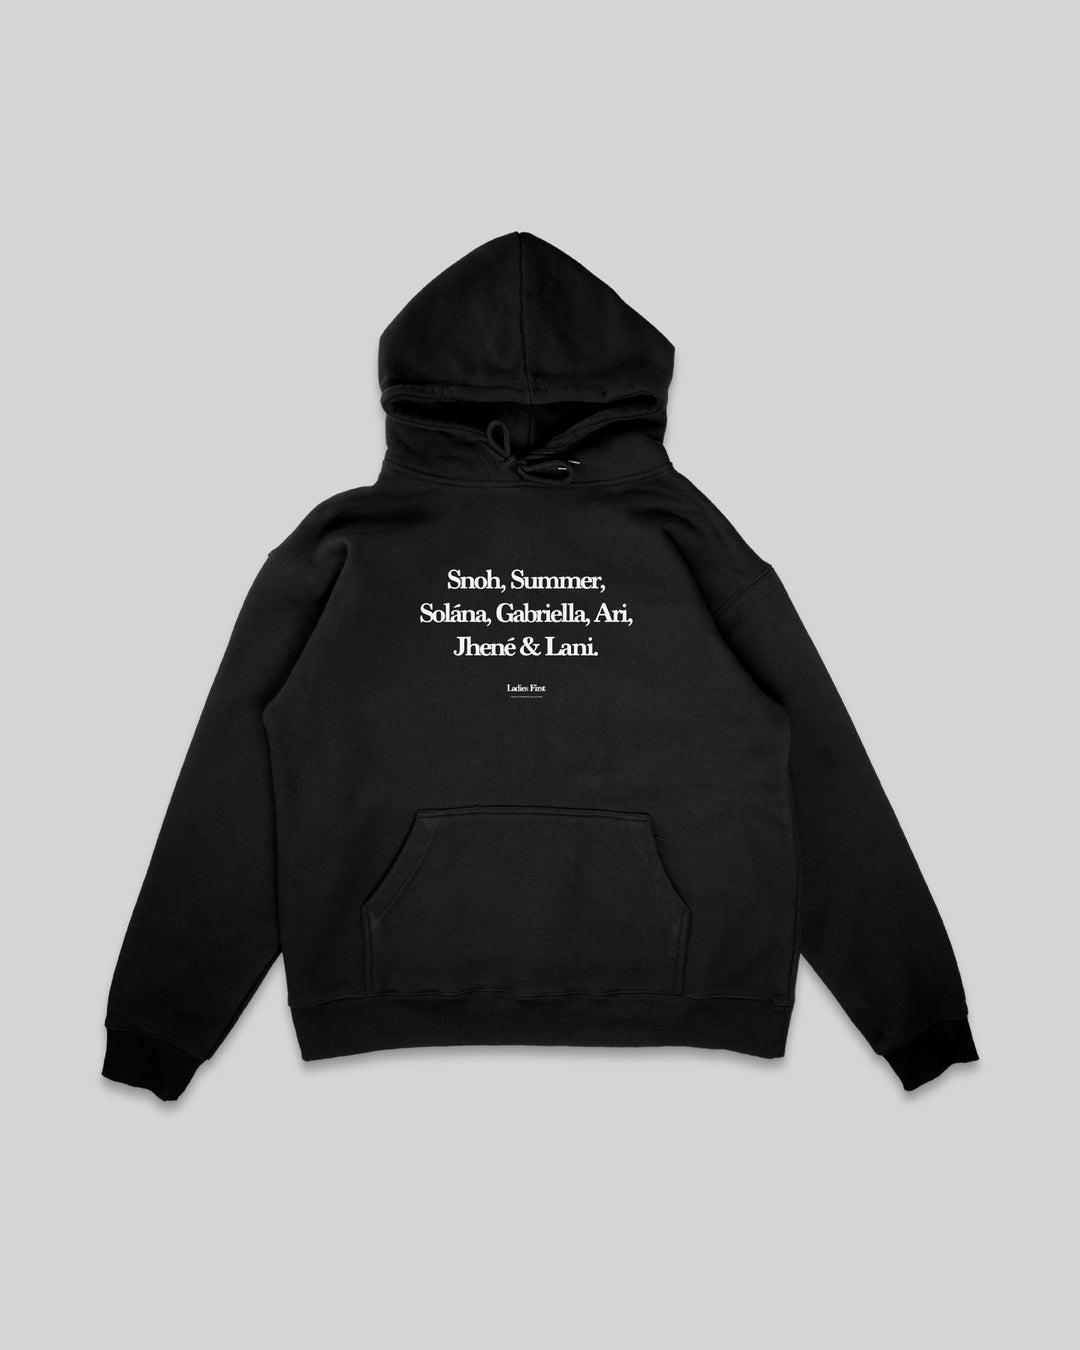 Ladies First Black Hoodie - trainofthoughtcollective